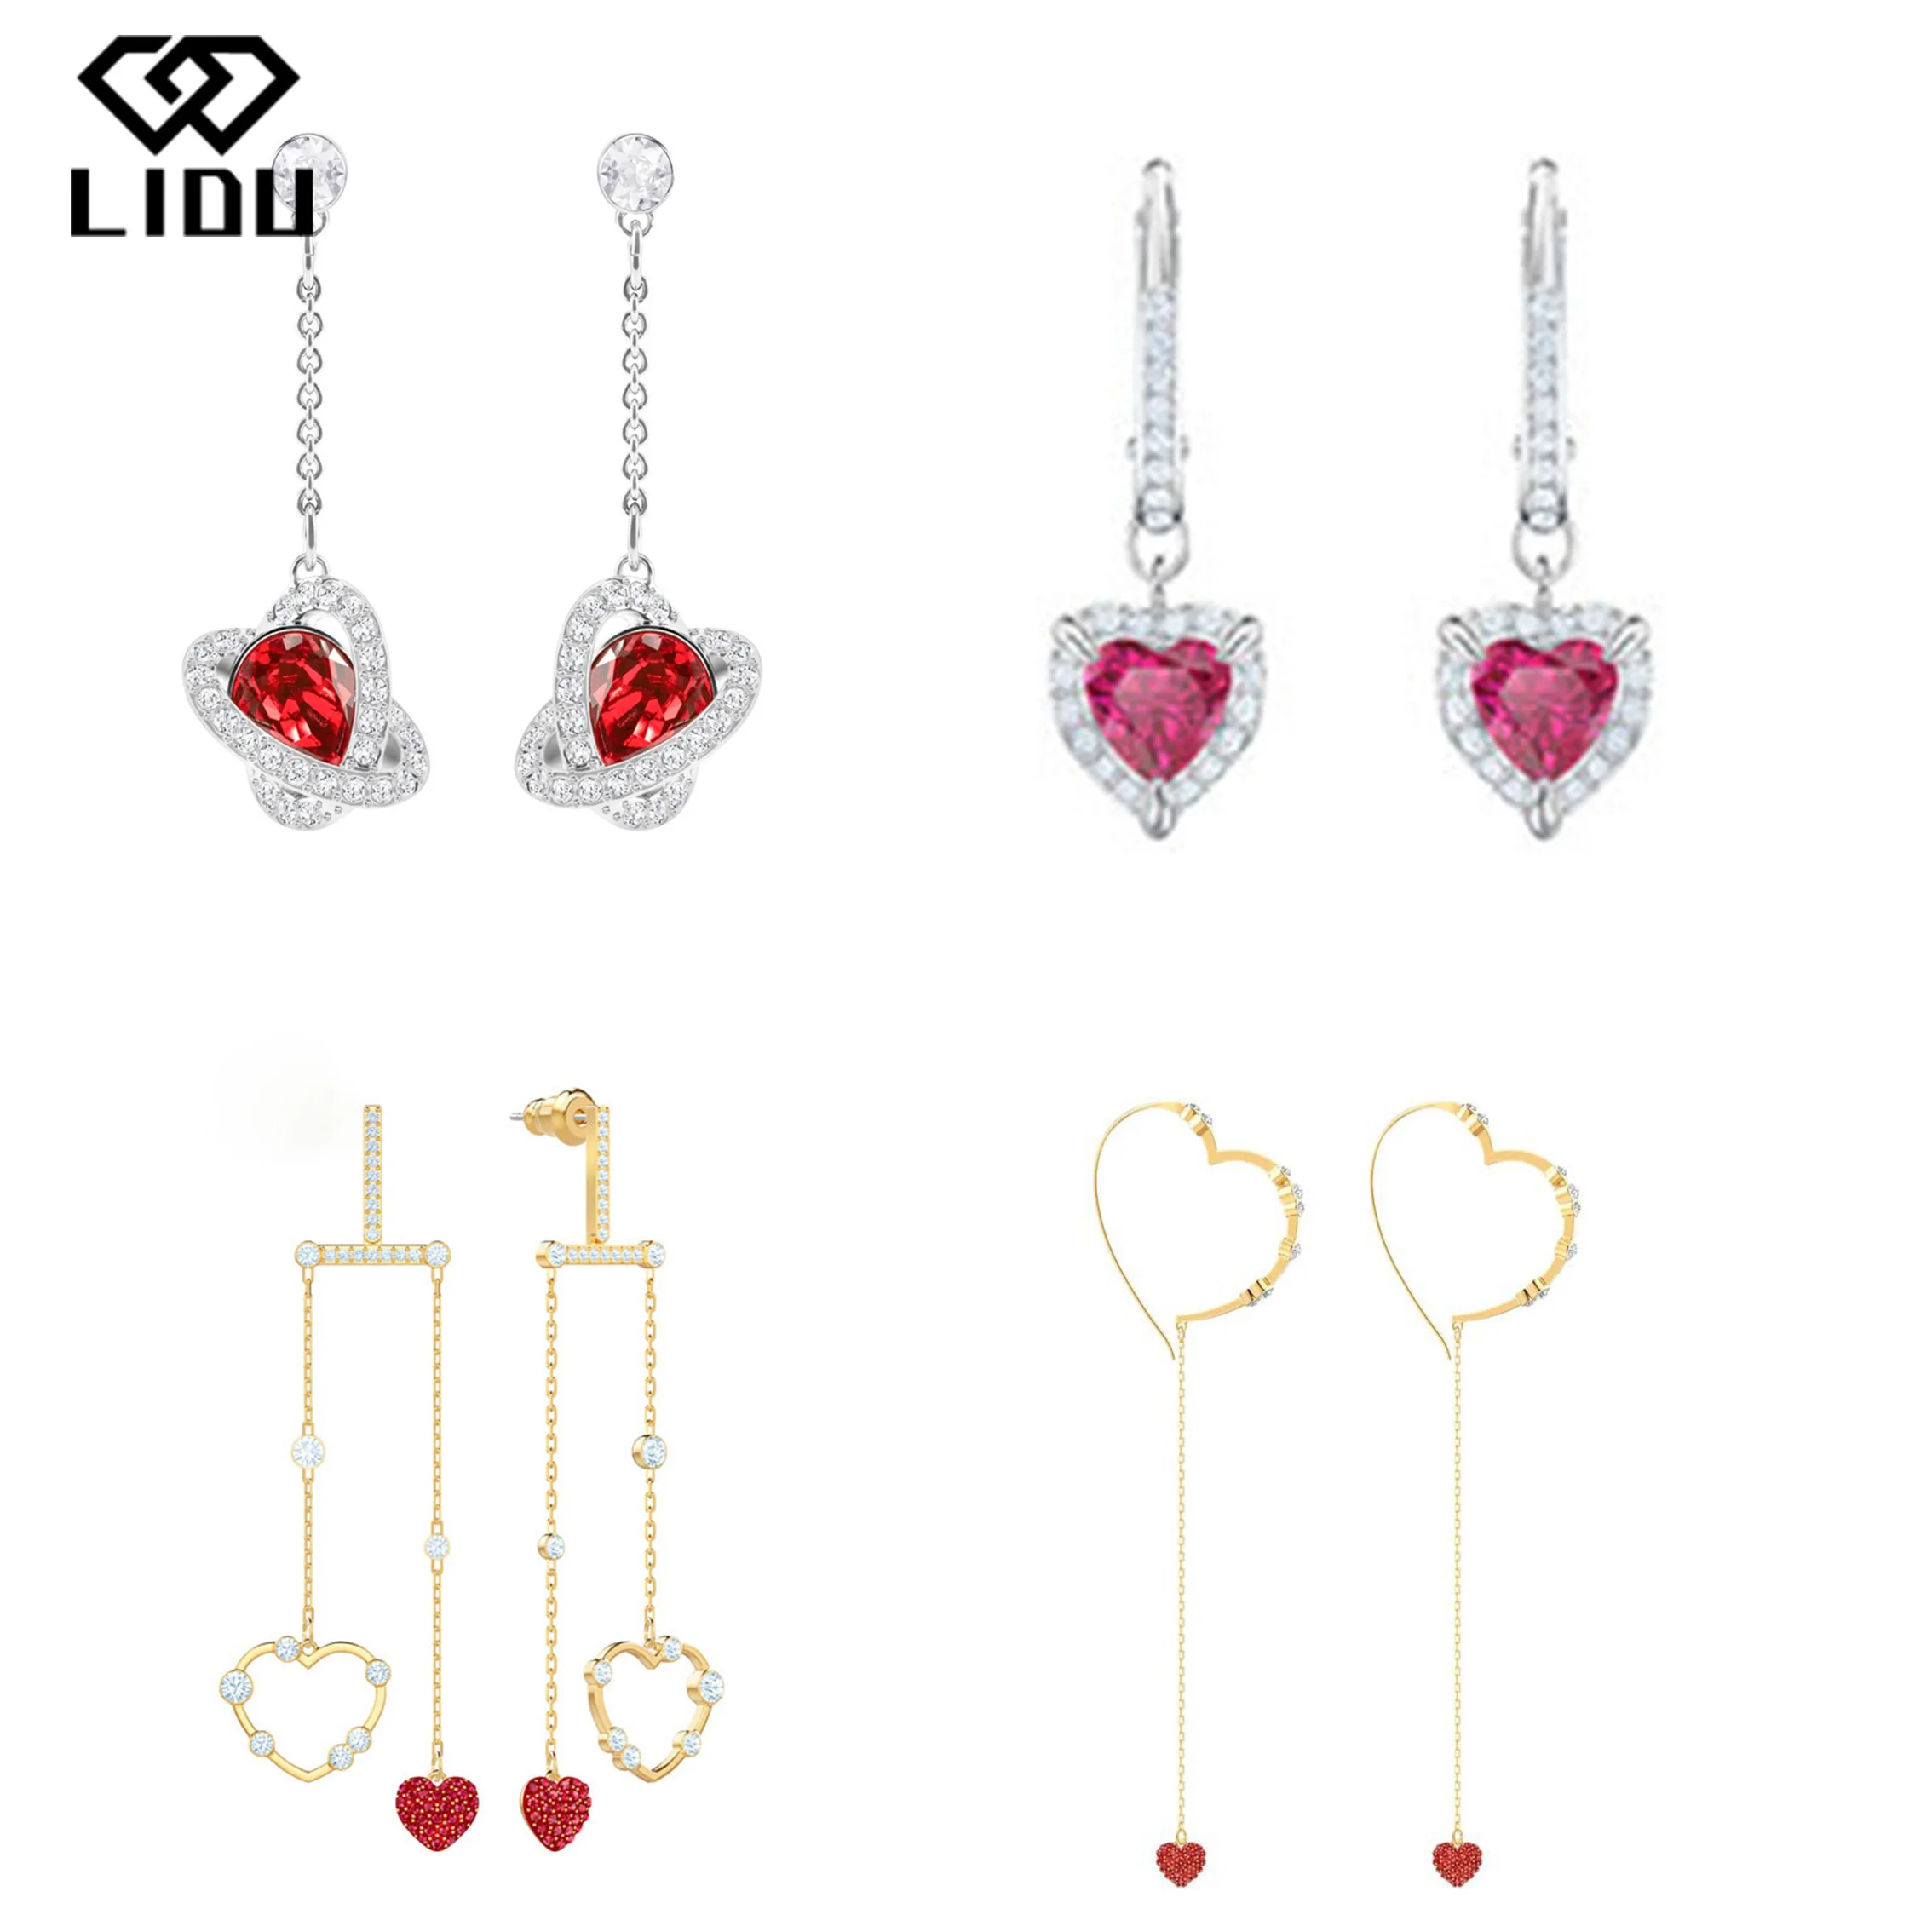 

LIDU High Quality Exquisite Fashion Heart Shaped Earrings Send Gifts To Friends Free Mail Manufacturers Wholesale